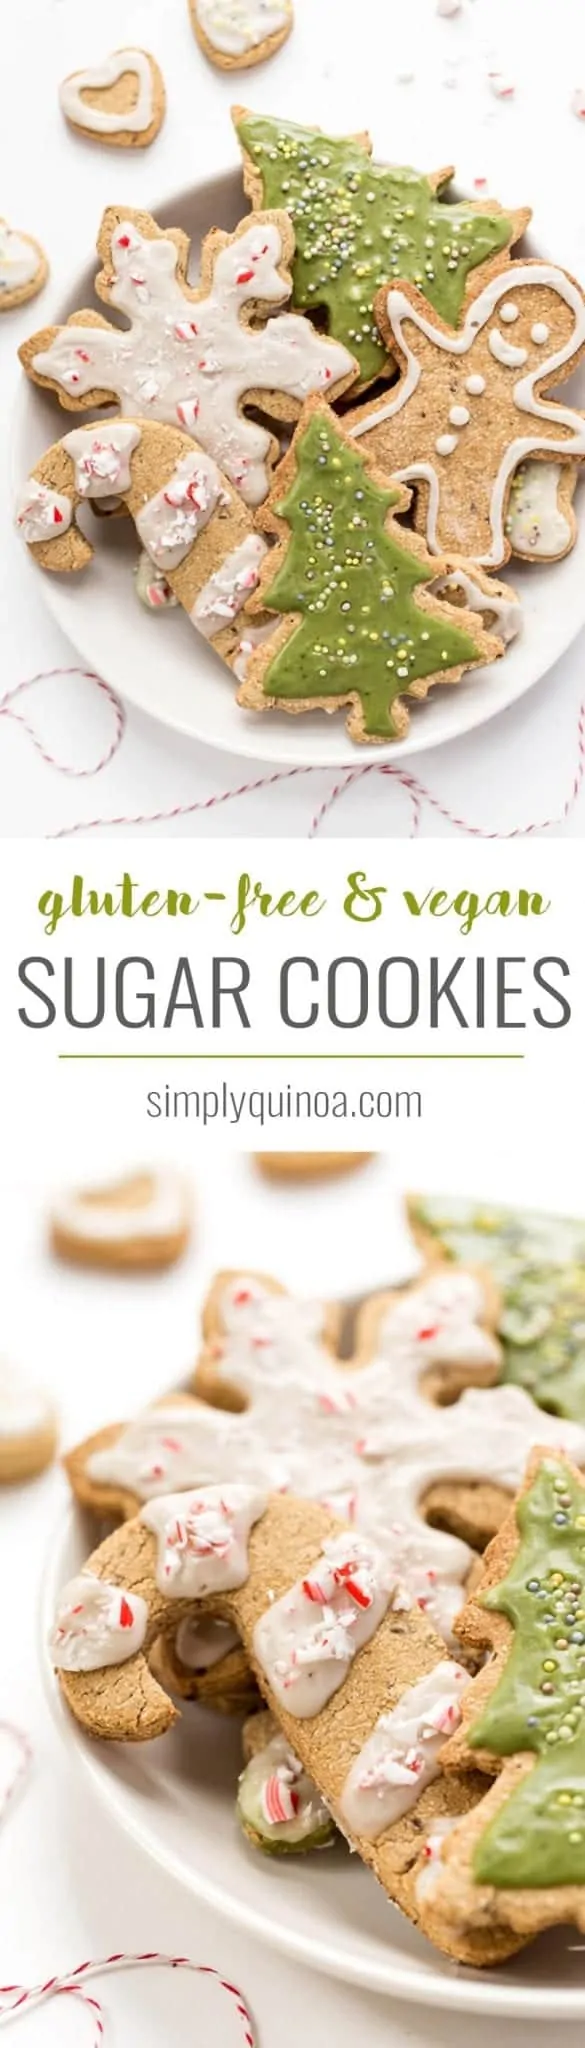 These GLUTEN-FREE & VEGAN Sugar Cookies are perfect for the holidays. Easy to make, healthy, nut-free and topped with a naturally colored green icing!